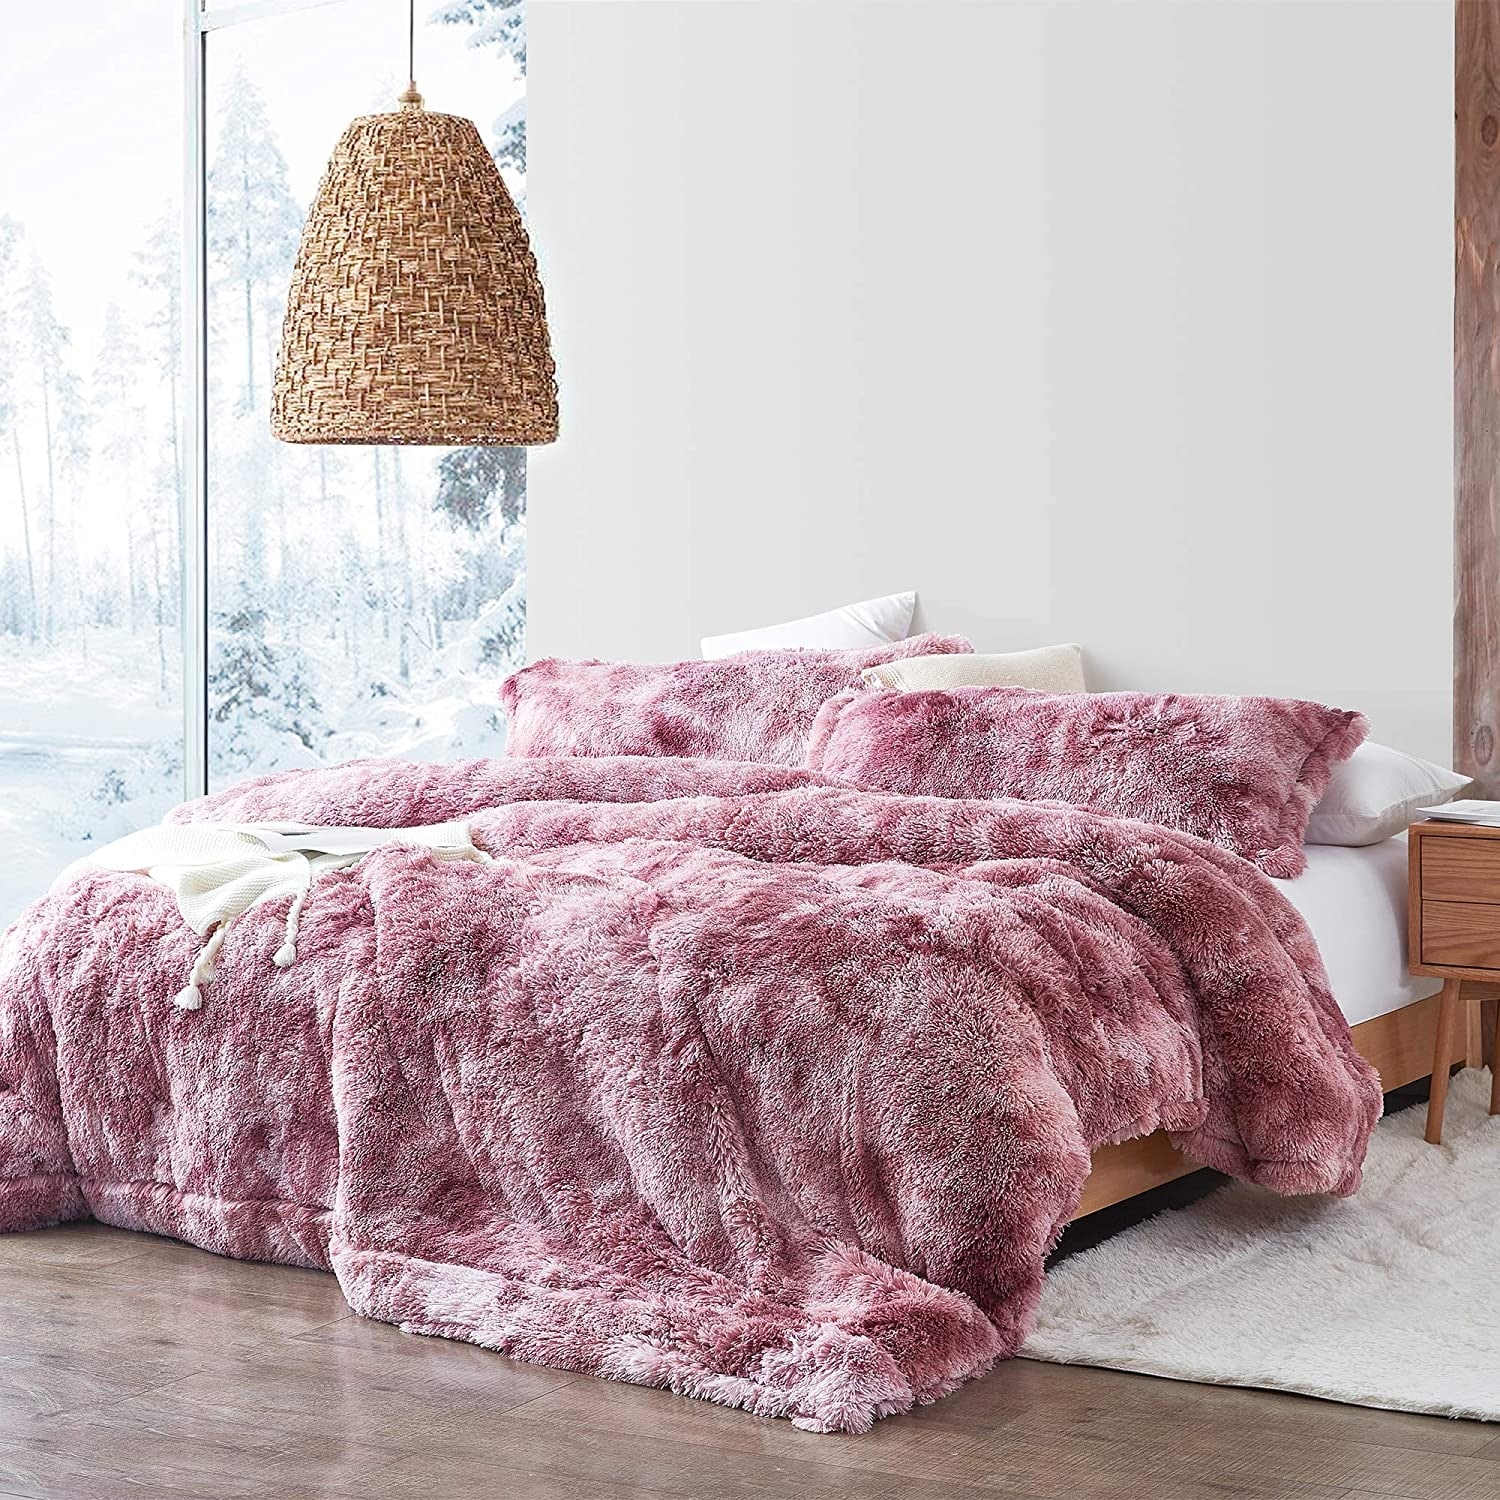 https://ak1.ostkcdn.com/images/products/is/images/direct/6373fa8526a4b6b8ee42cd8ce7530cbc54513760/Unicorn-Dreamz---Coma-Inducer%C2%AE-Oversized-Comforter---Raspberry-Cupcake.jpg